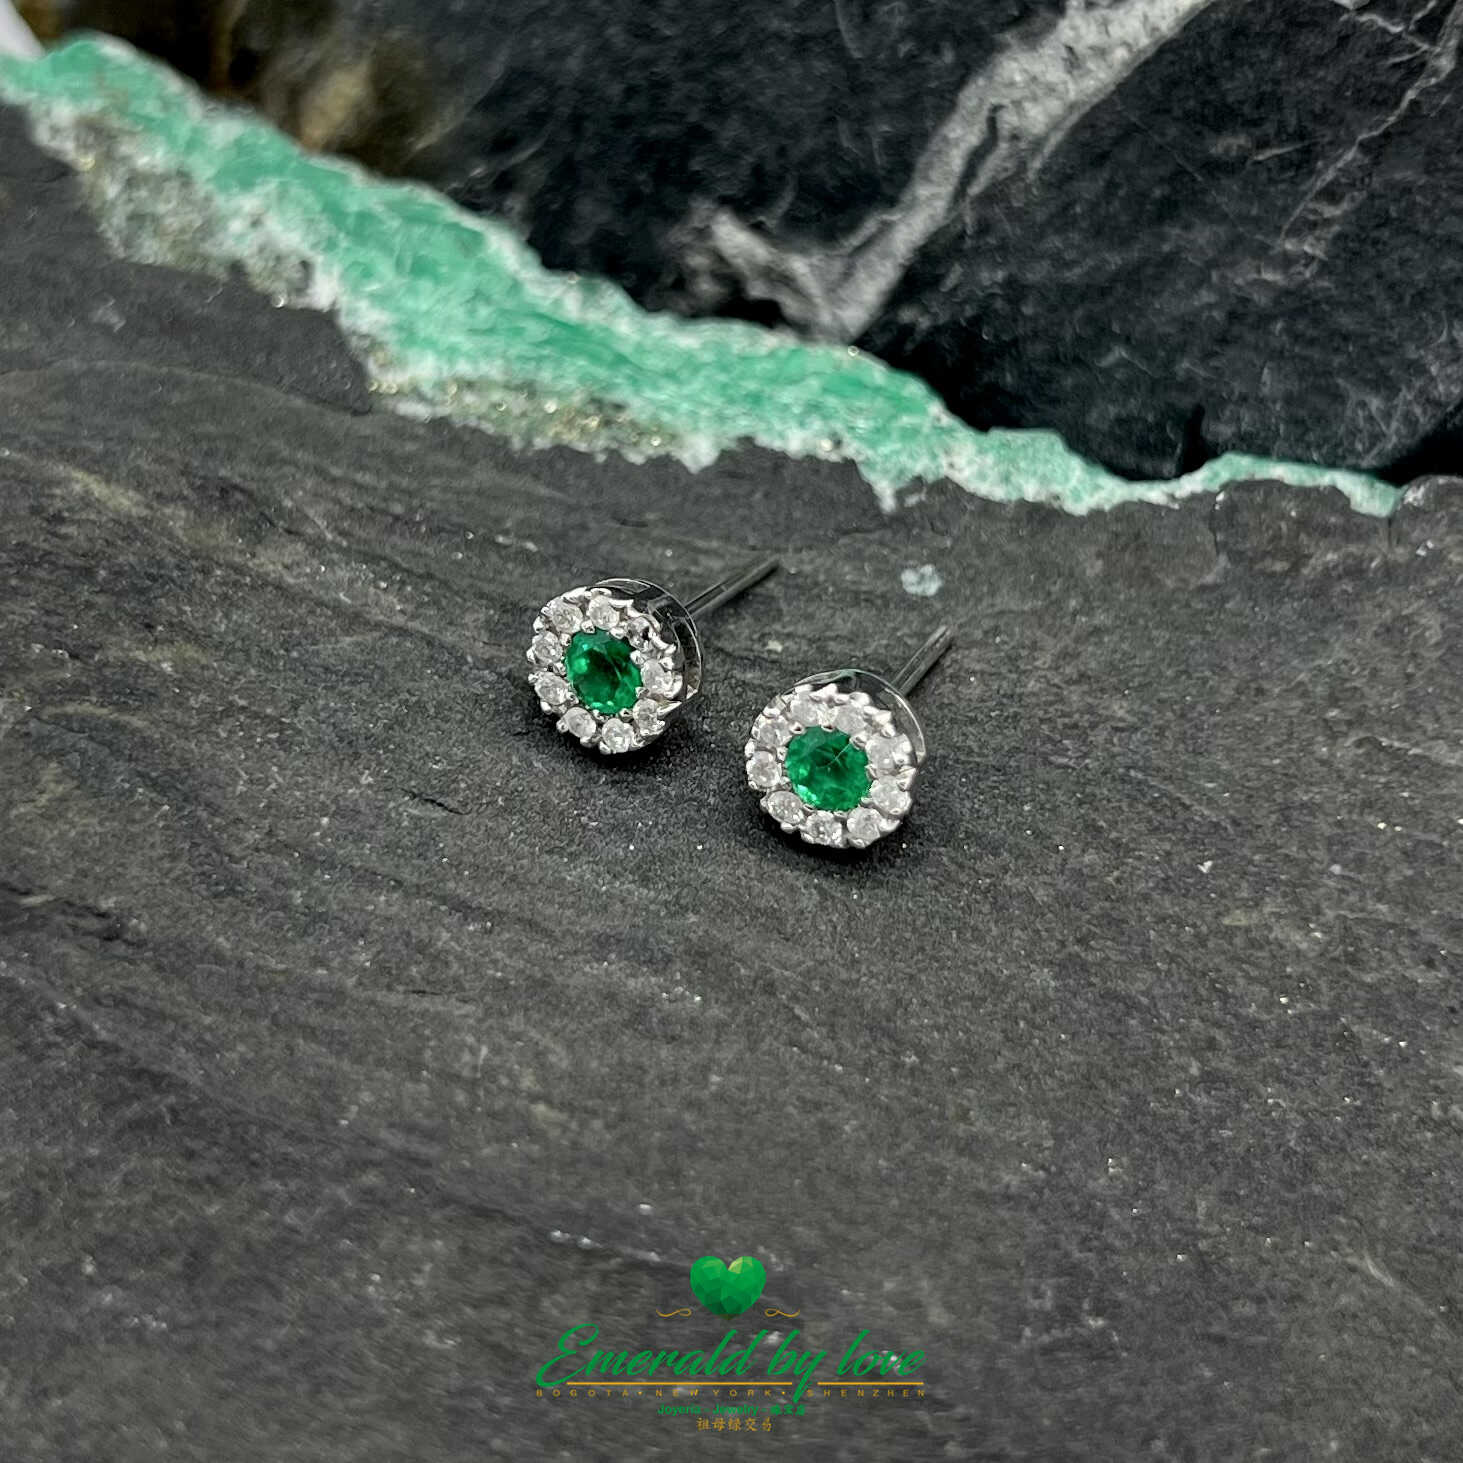 Graceful Beauty in every stone Colombian Emerald Marquise Earrings in 18K White Gold